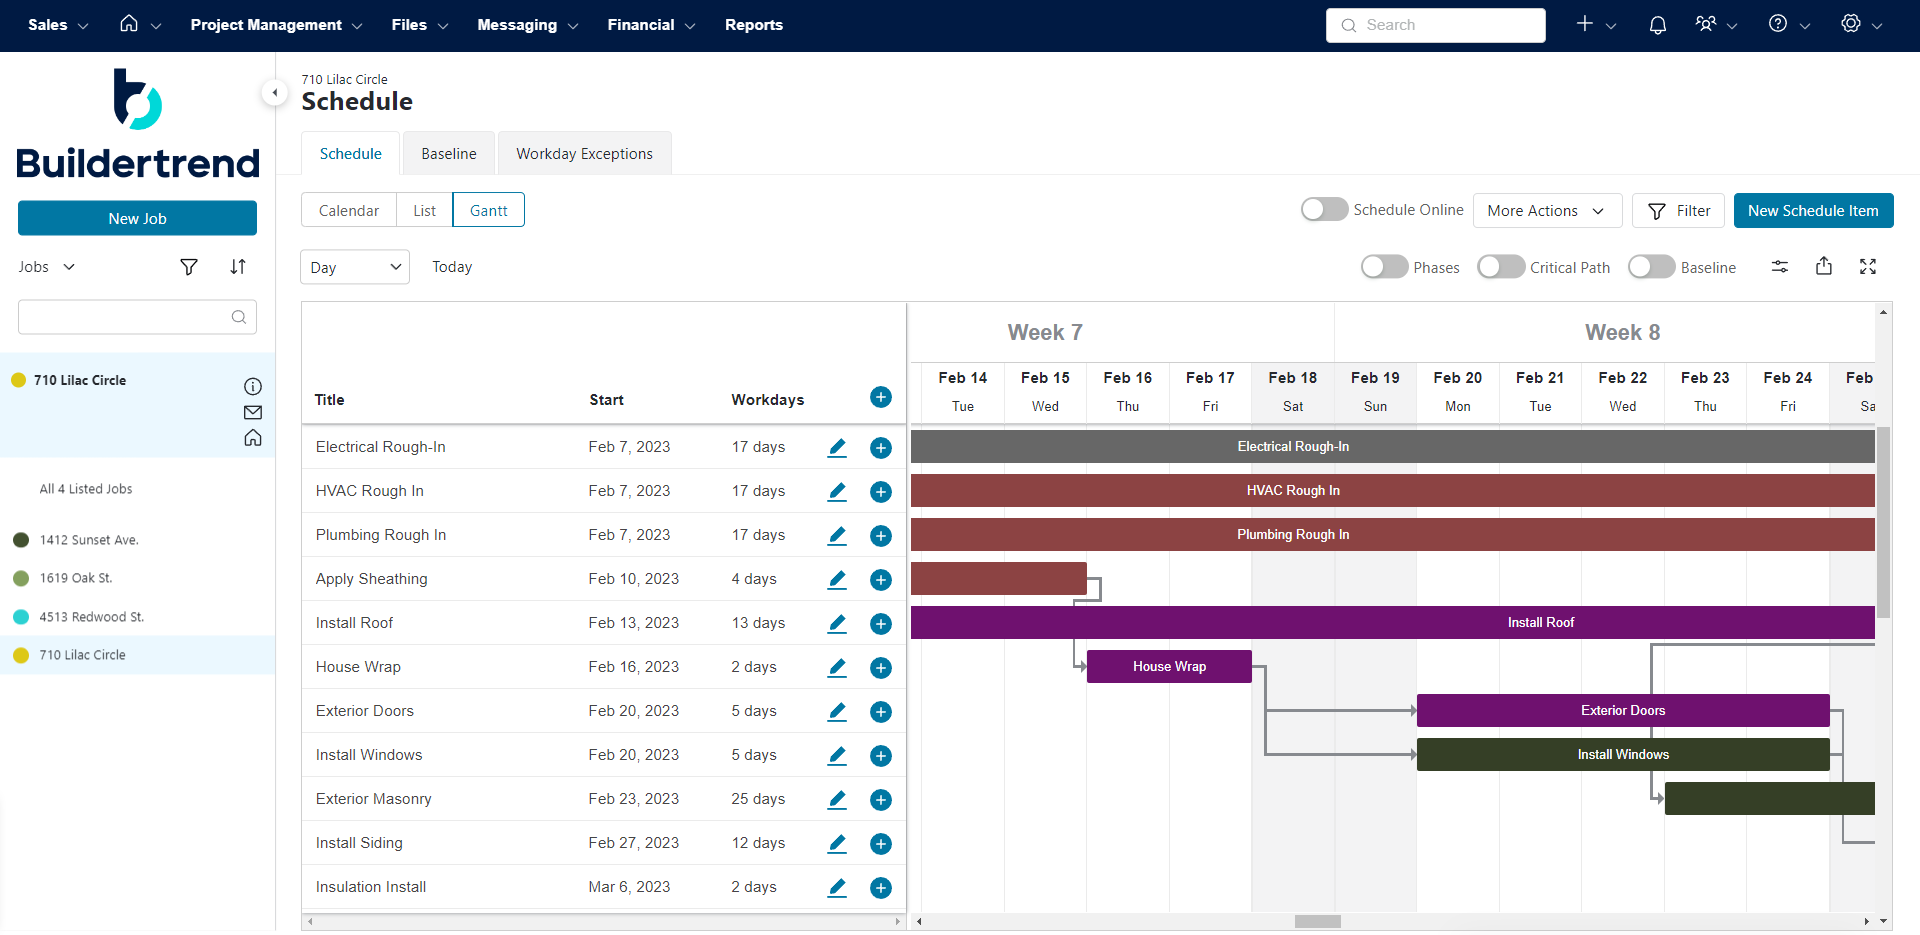 BuilderTrend's Gantt chart, key feature of any construction scheduling software